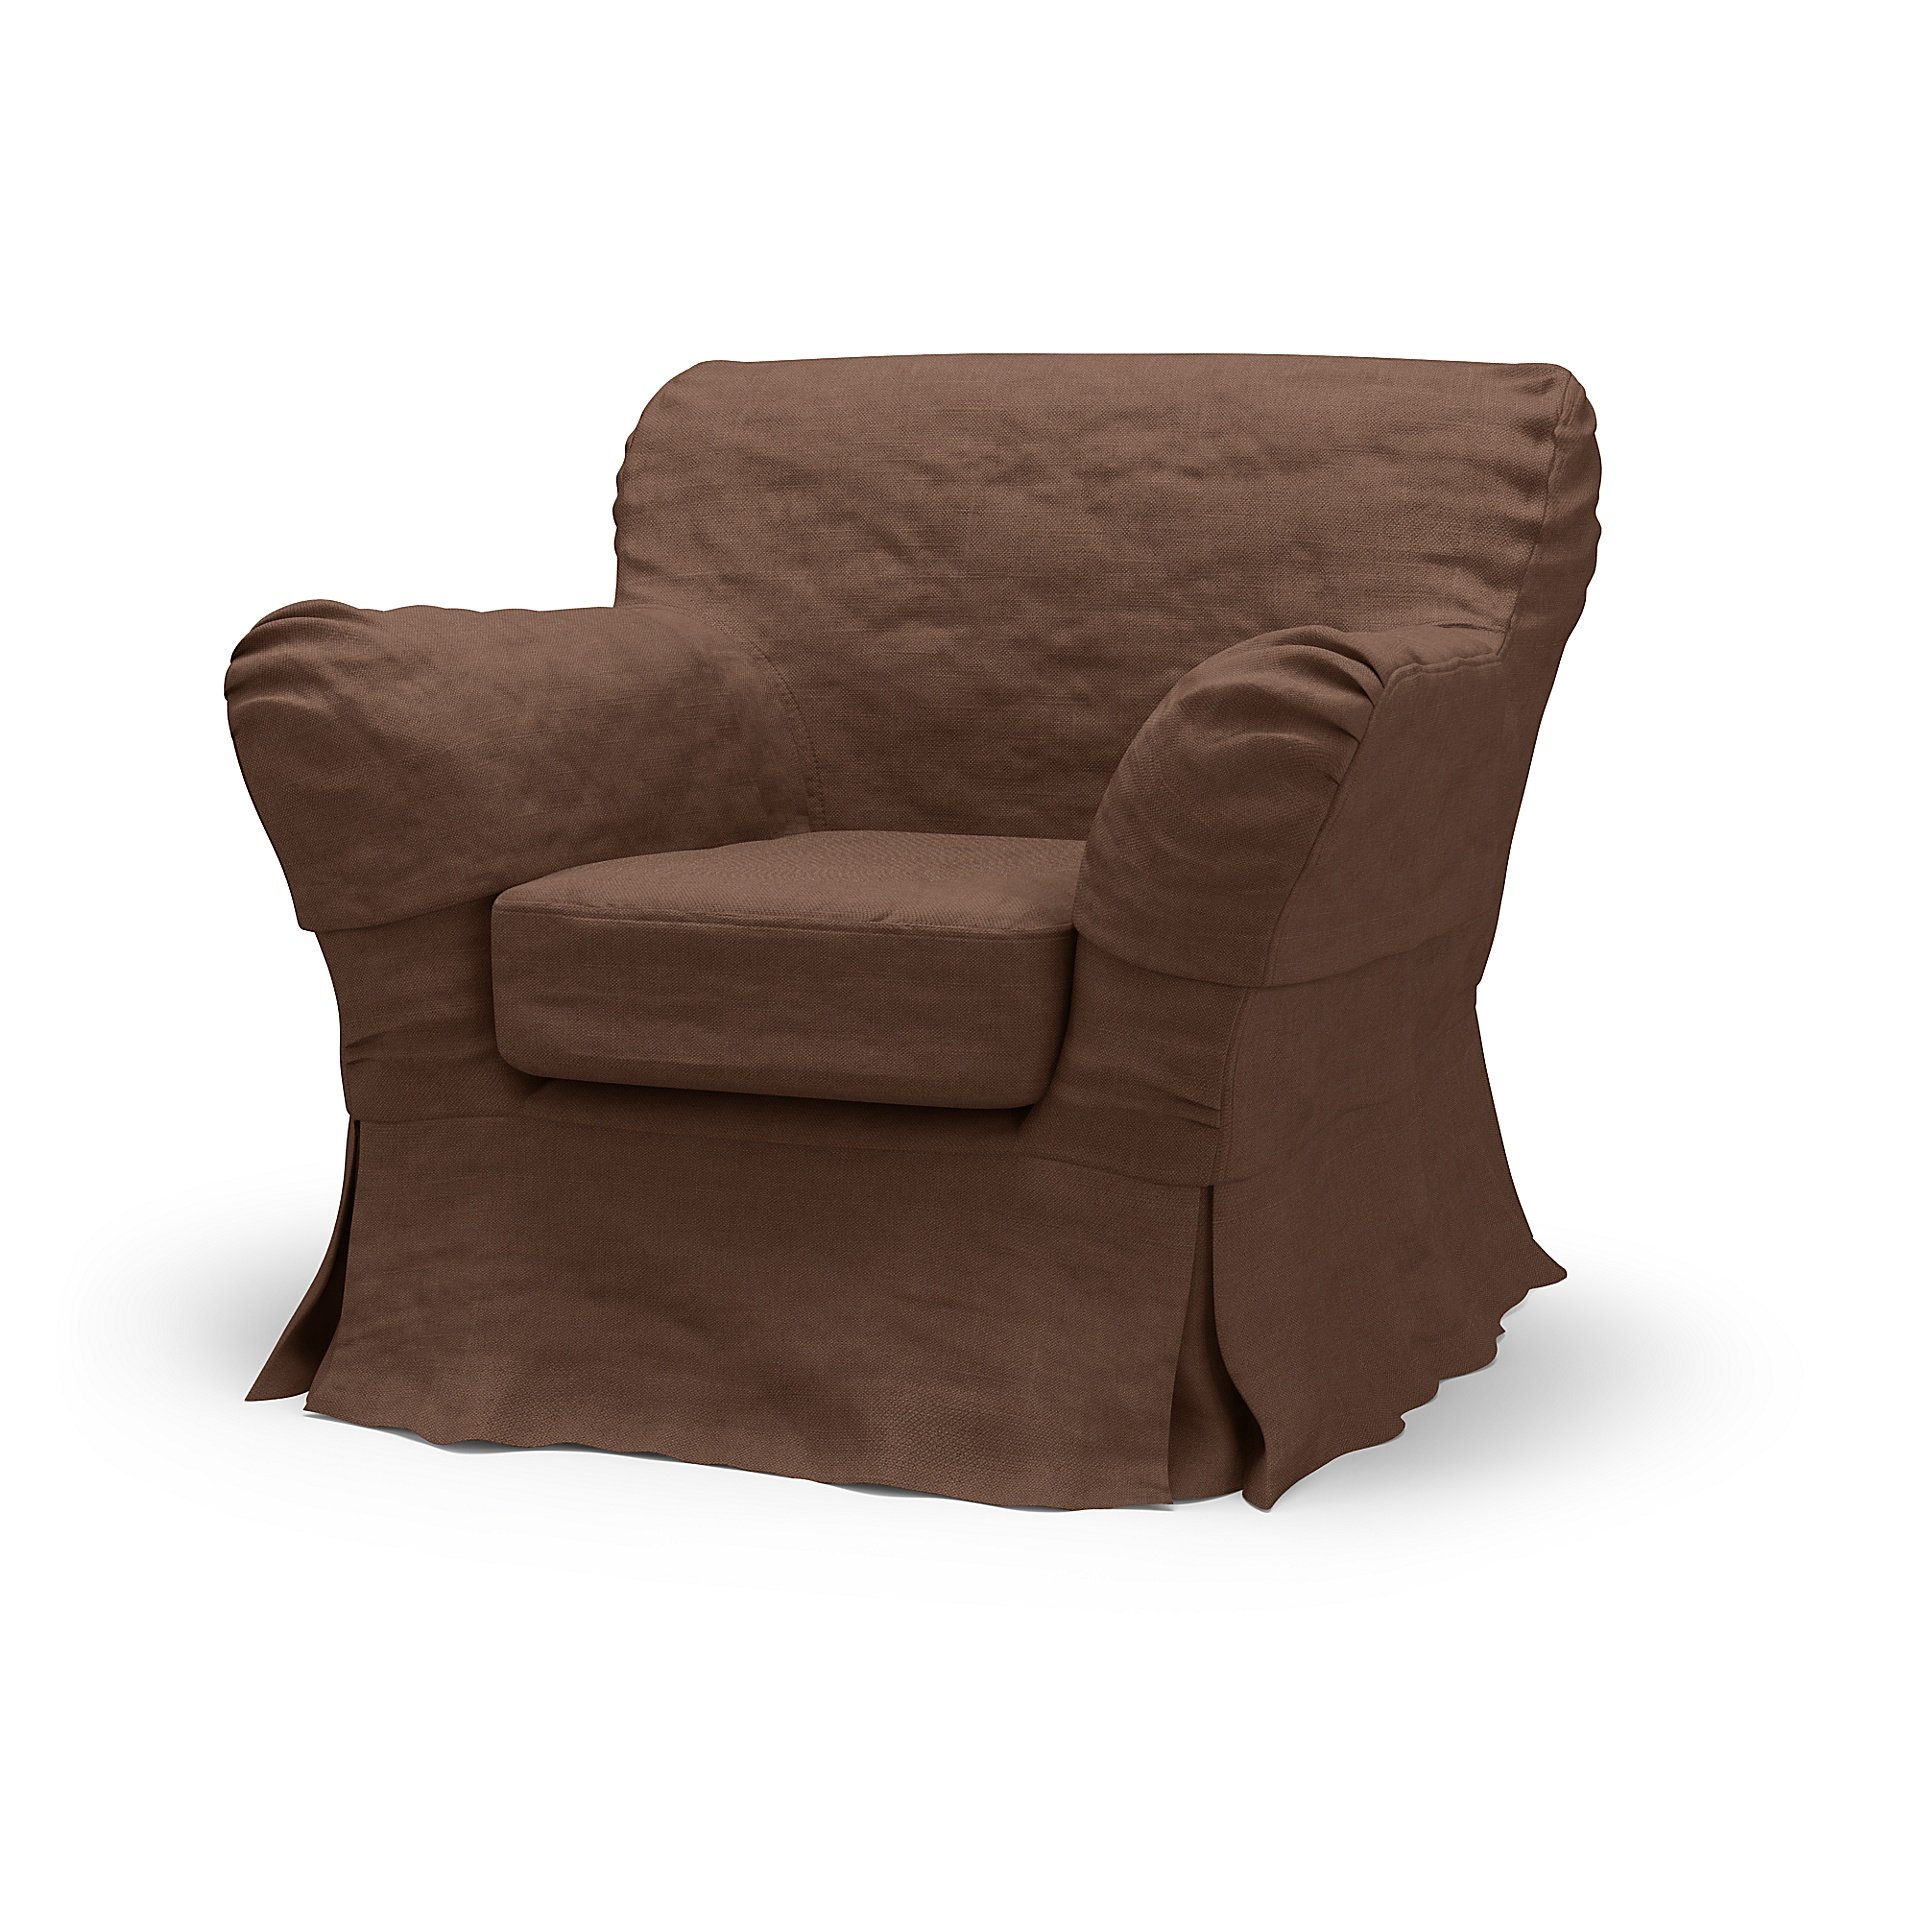 IKEA - Tomelilla Low Back Armchair Cover (Large), Chocolate, Linen - Bemz